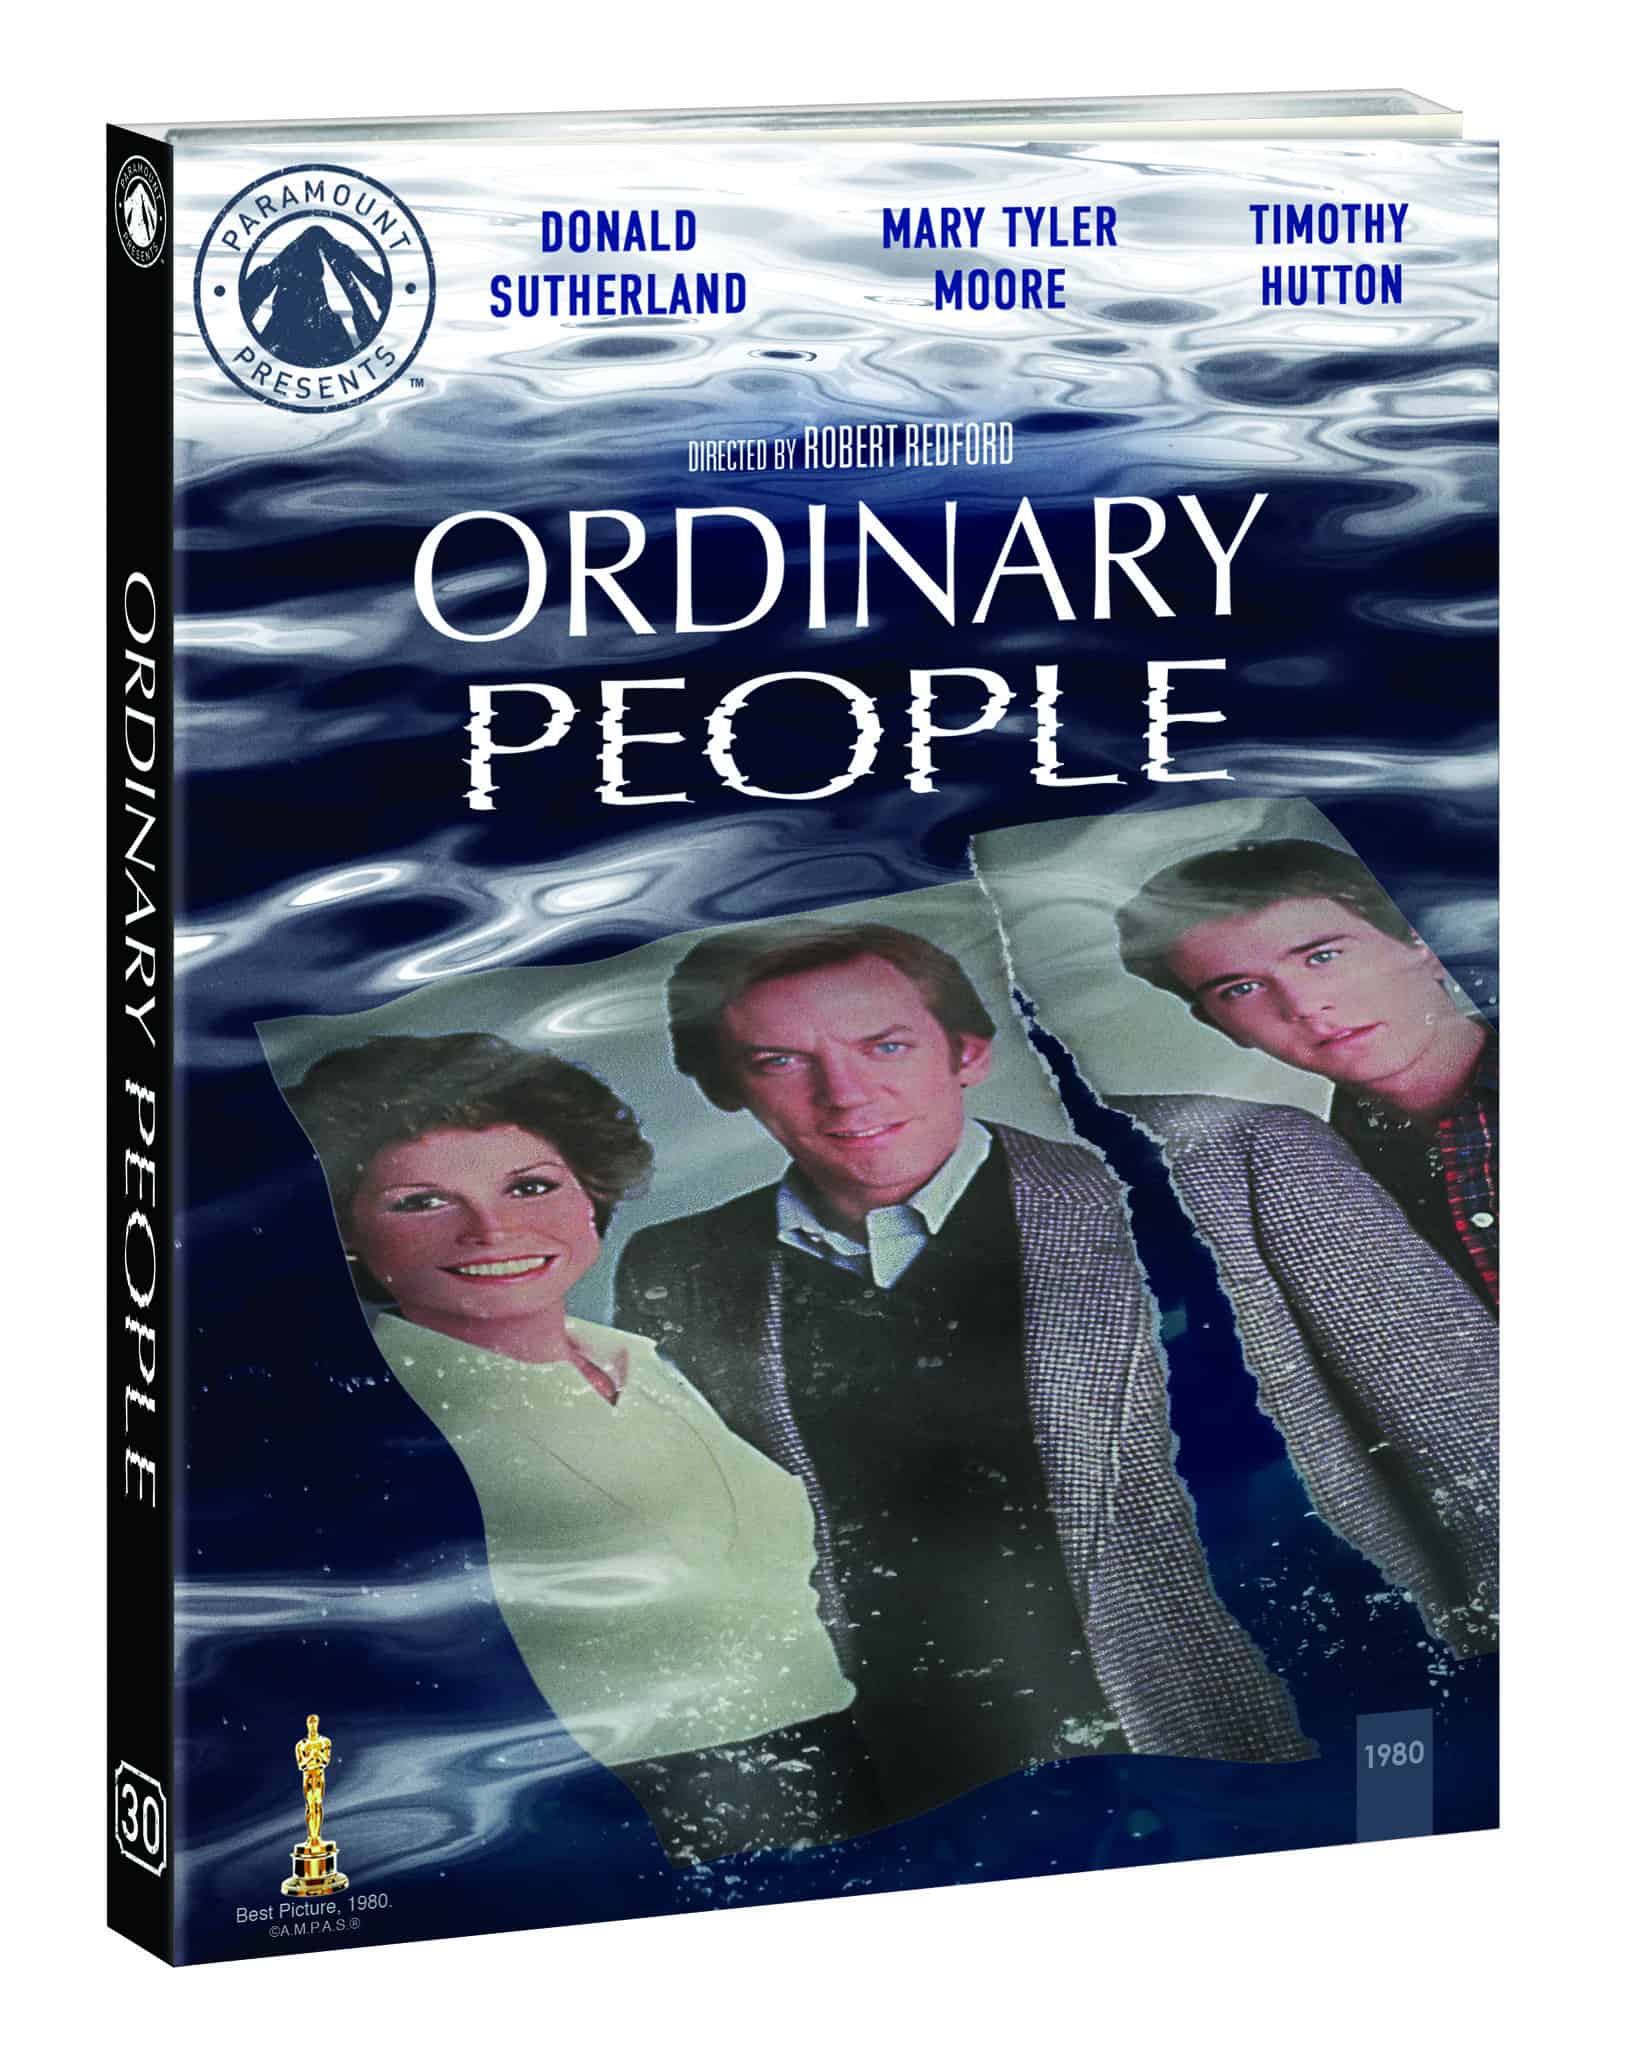 Ordinary People comes to Blu-ray on March 29th 18